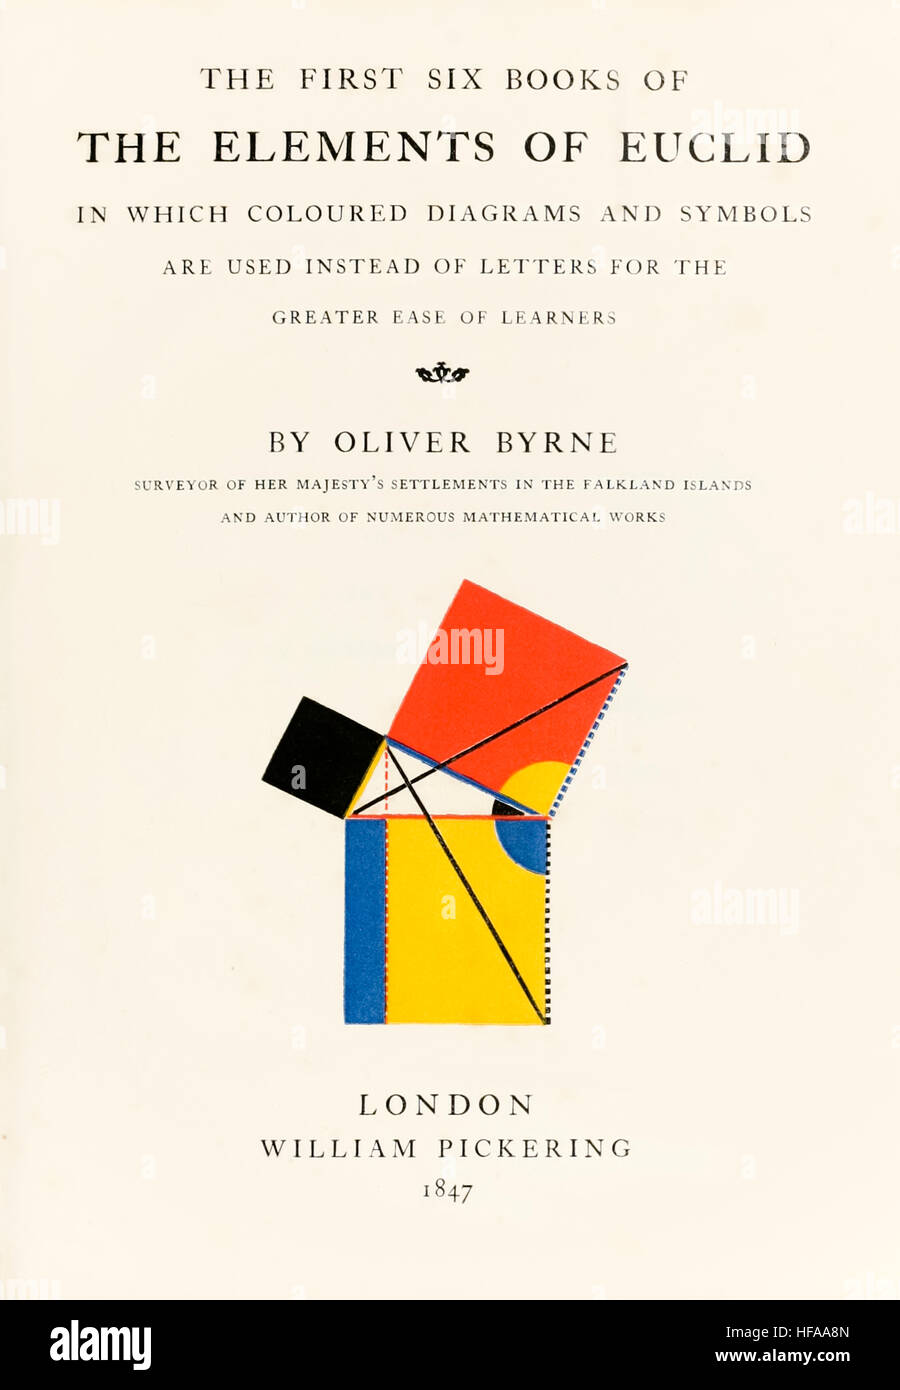 Title page from ‘The First Six Books of the elements of Euclid in which coloured diagrams and symbols are used instead of letters' by Oliver Byrne (1795-1876) published in 1847. An innovative use of graphic art and colours to convey Euclid's geometric ideas. See description for more information. Stock Photo